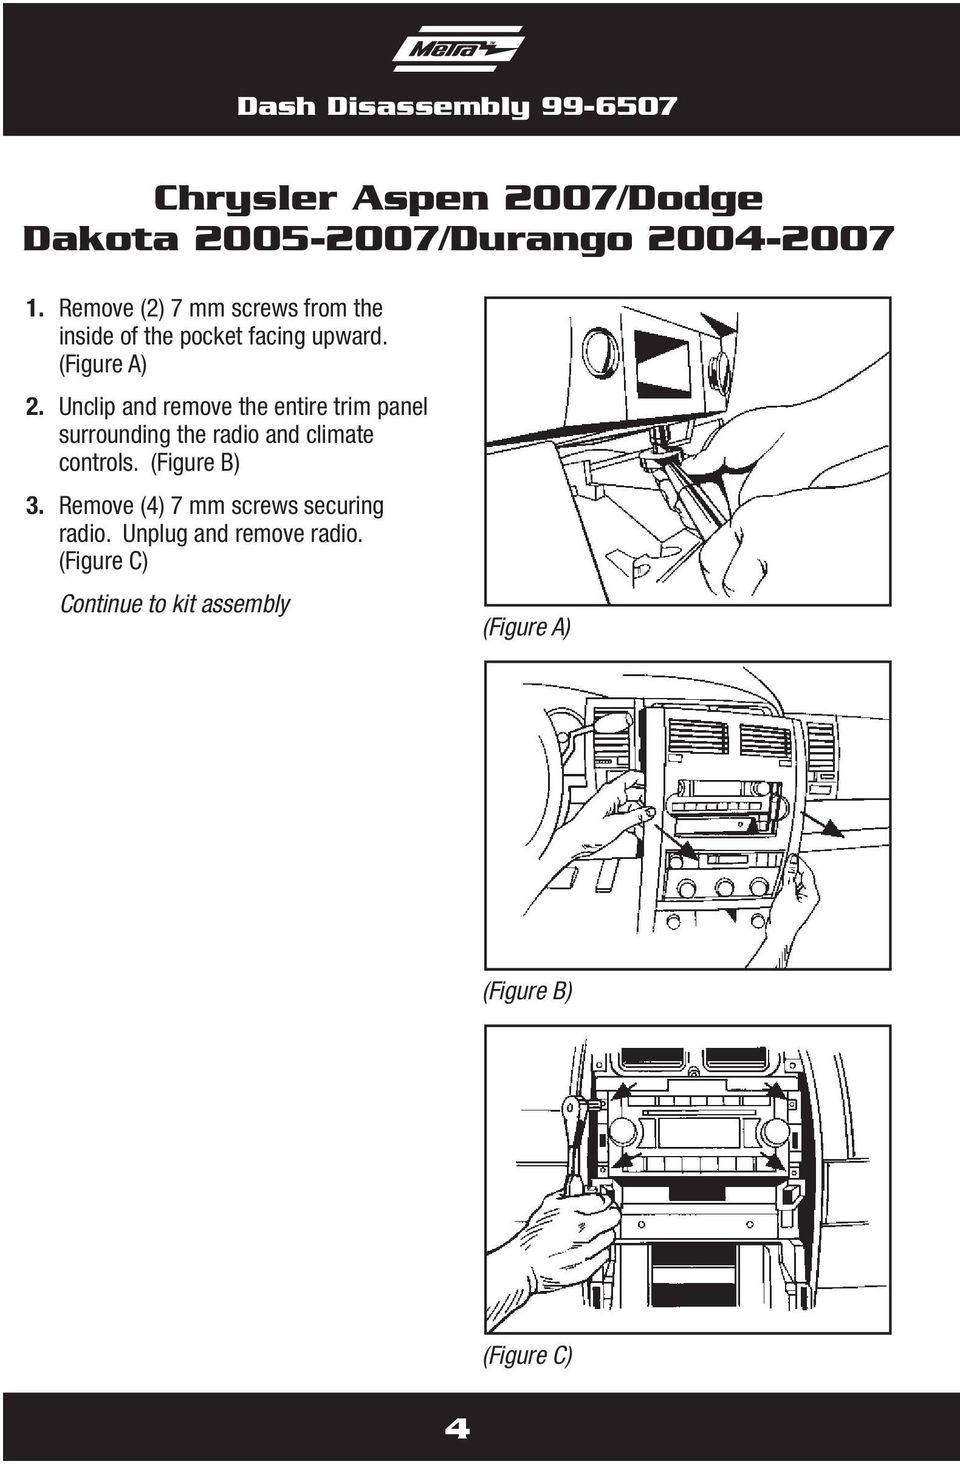 Unclip and remove the entire trim panel surrounding the radio and climate controls. (Figure B) 3.